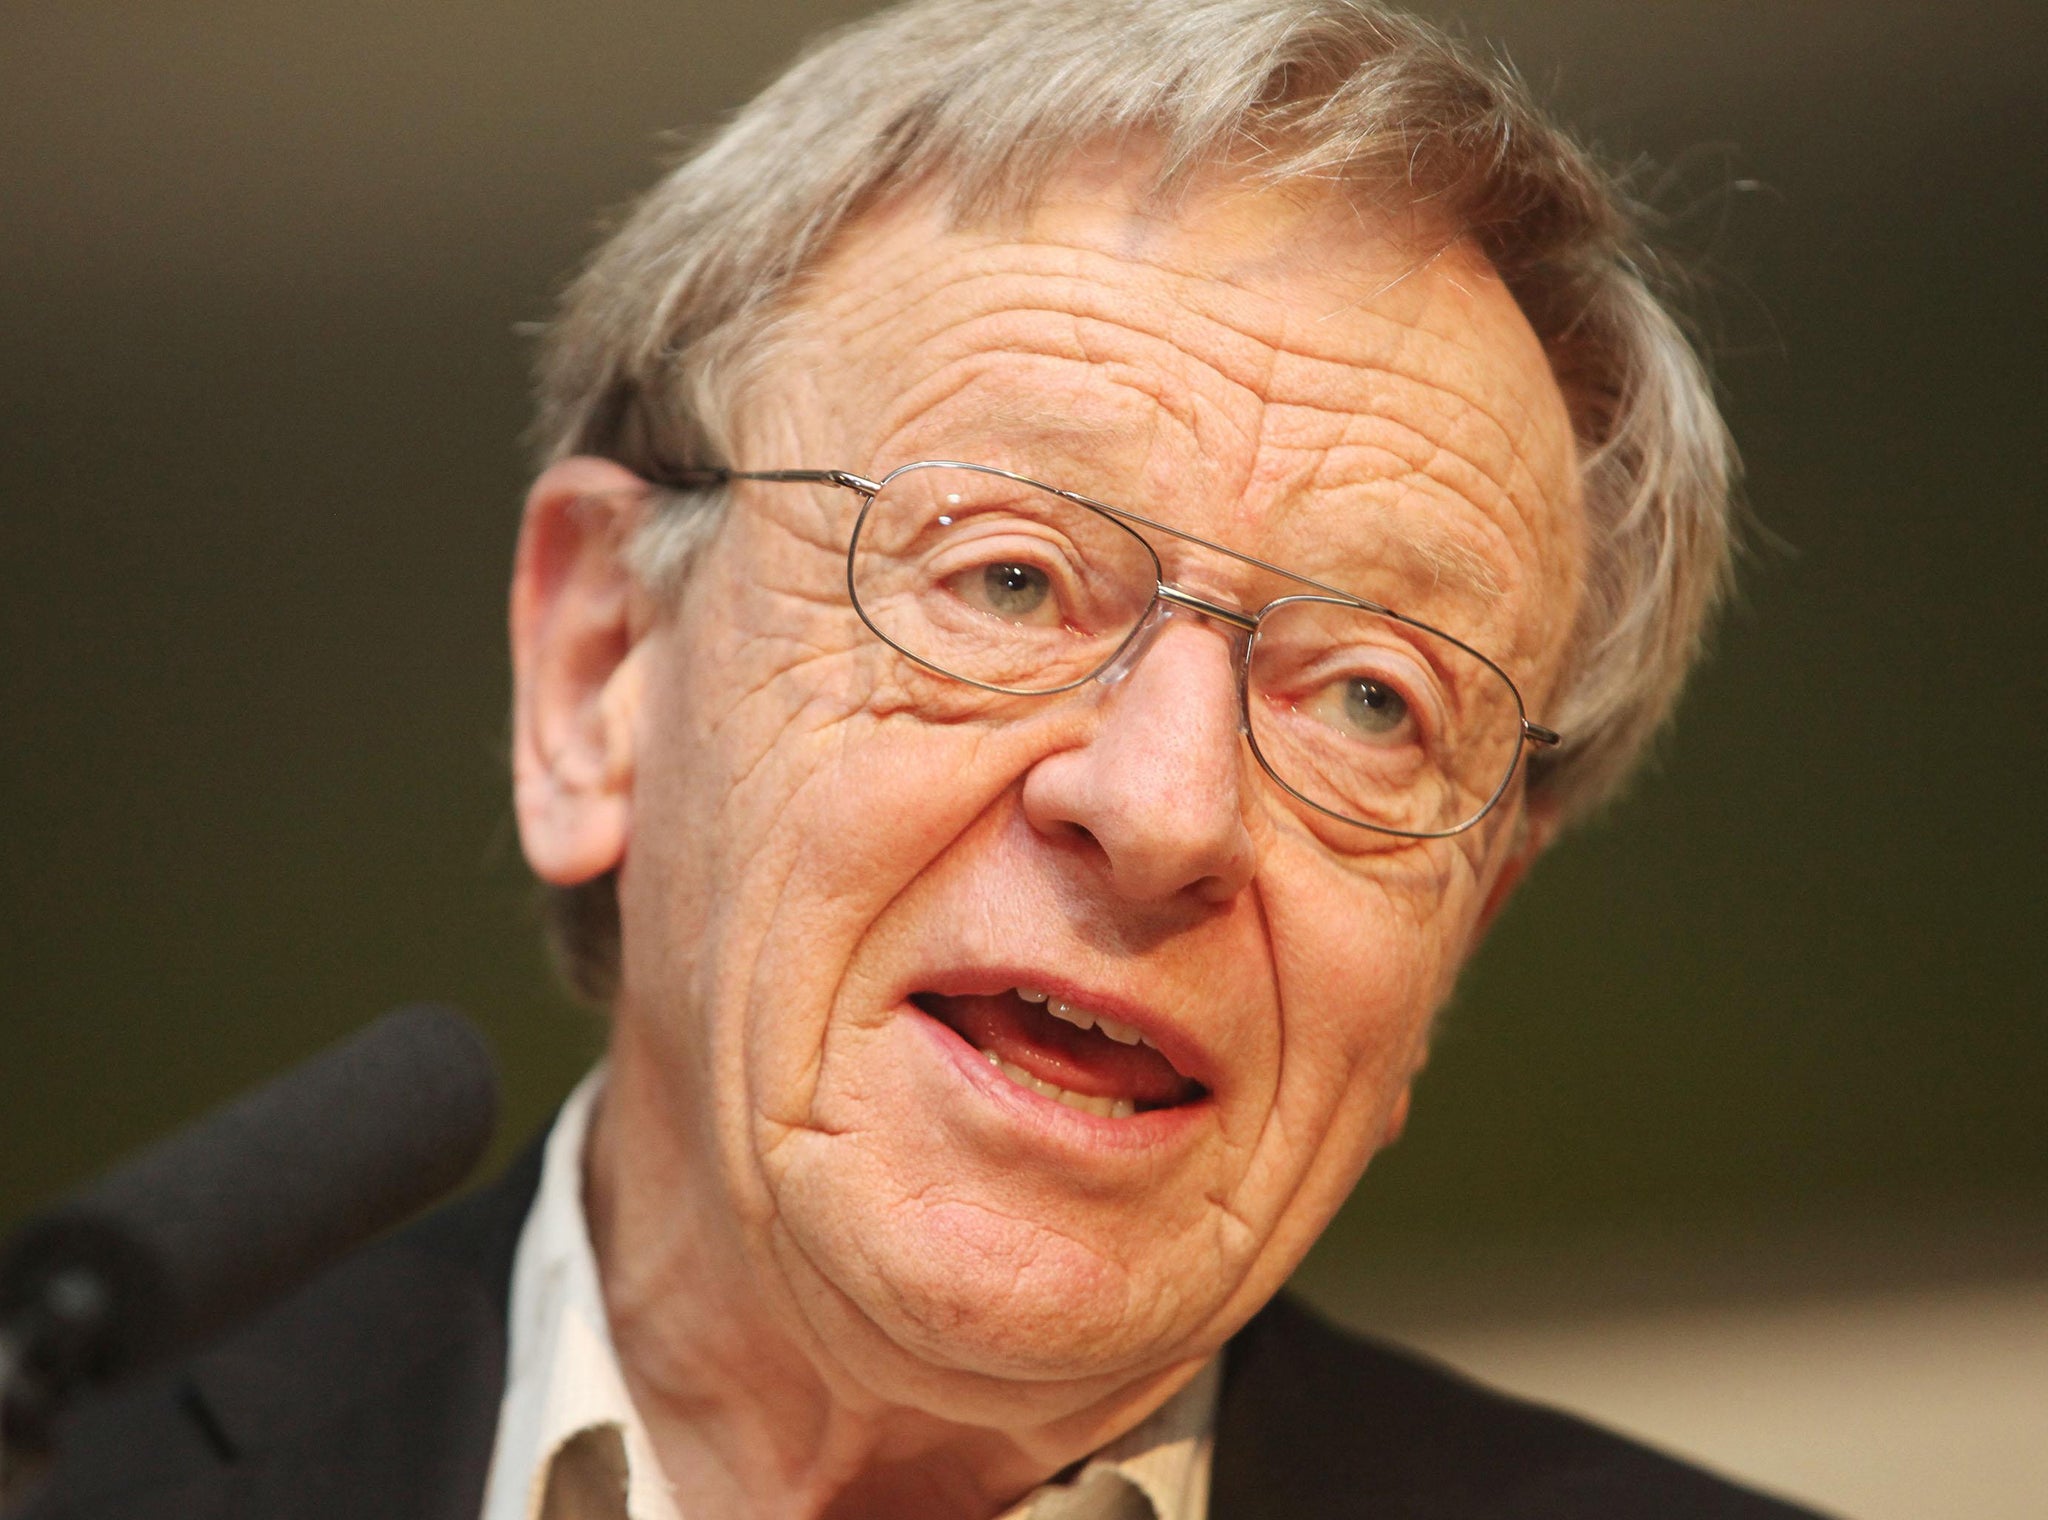 Lord Dubs came to the UK as part of the 'Kindertransport' saving children from the Nazis